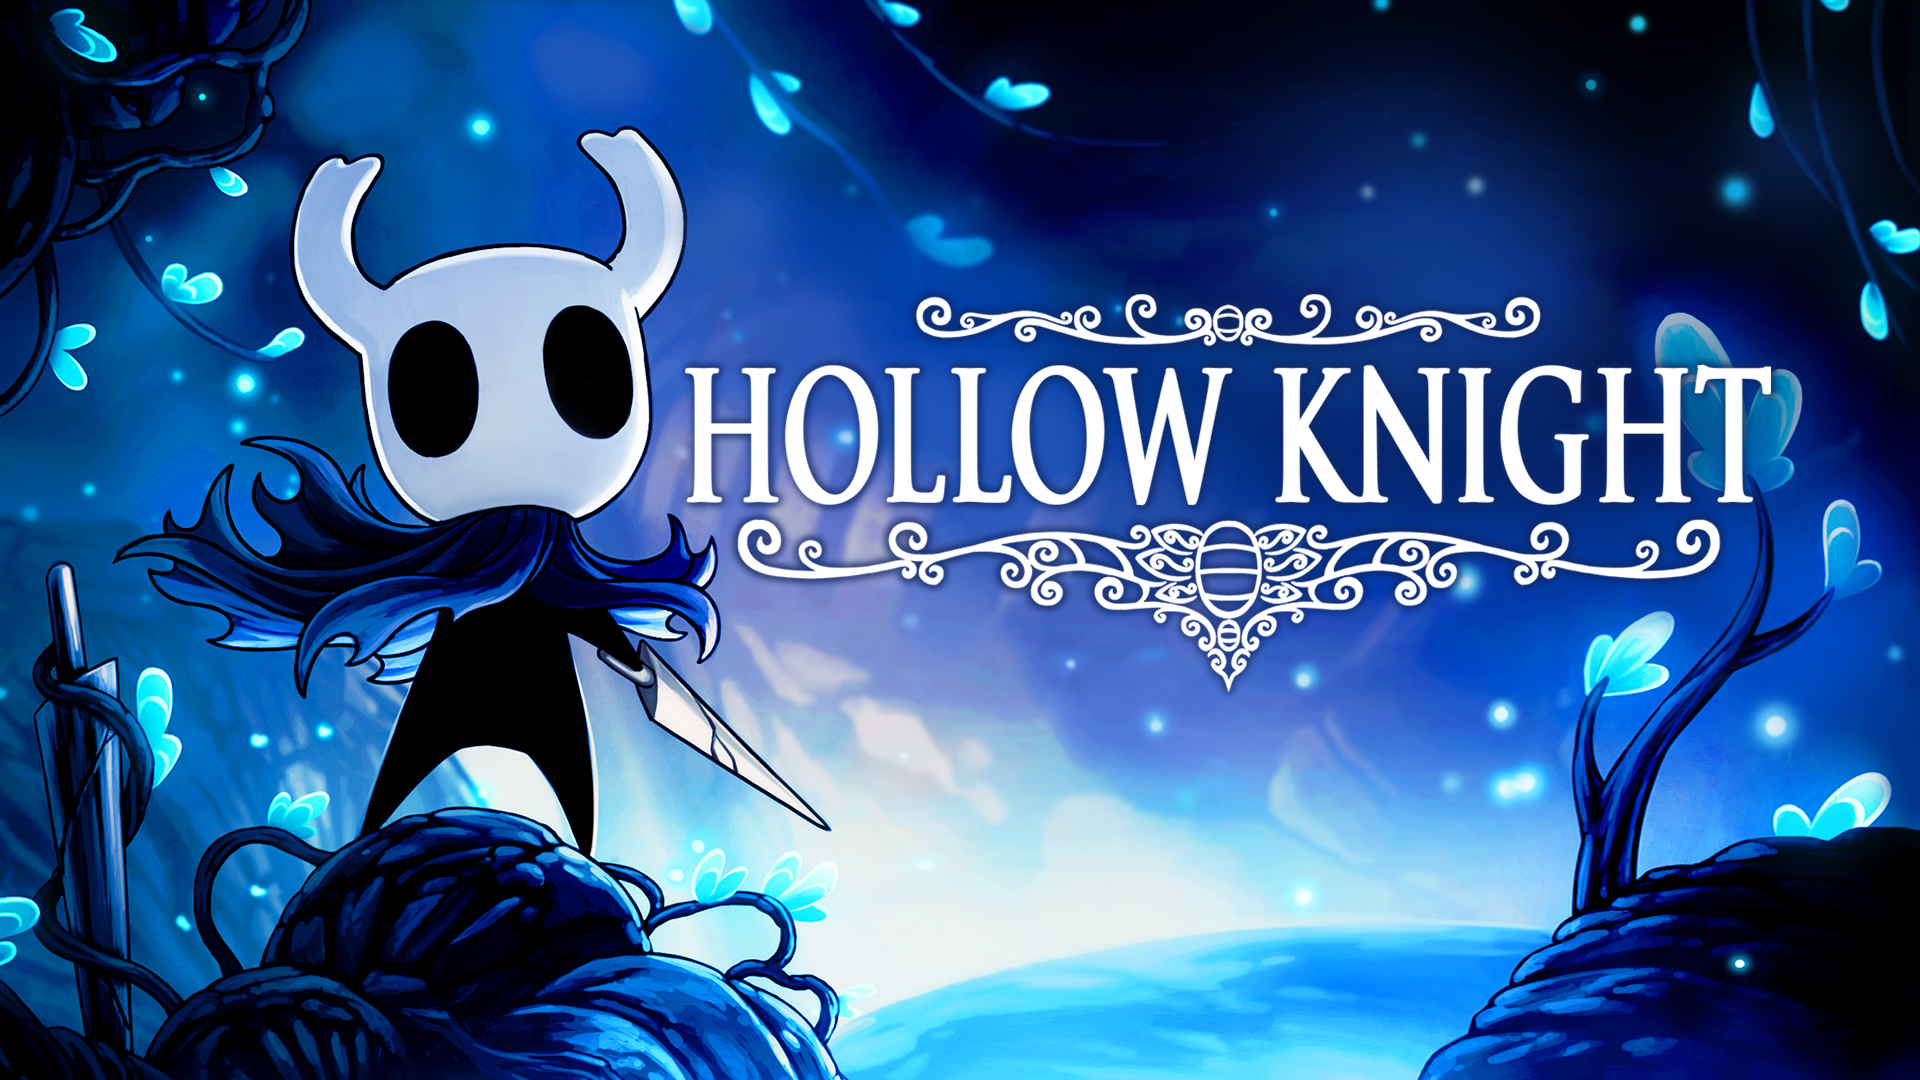 Hollow Knight free Download PC Game (Full Version)